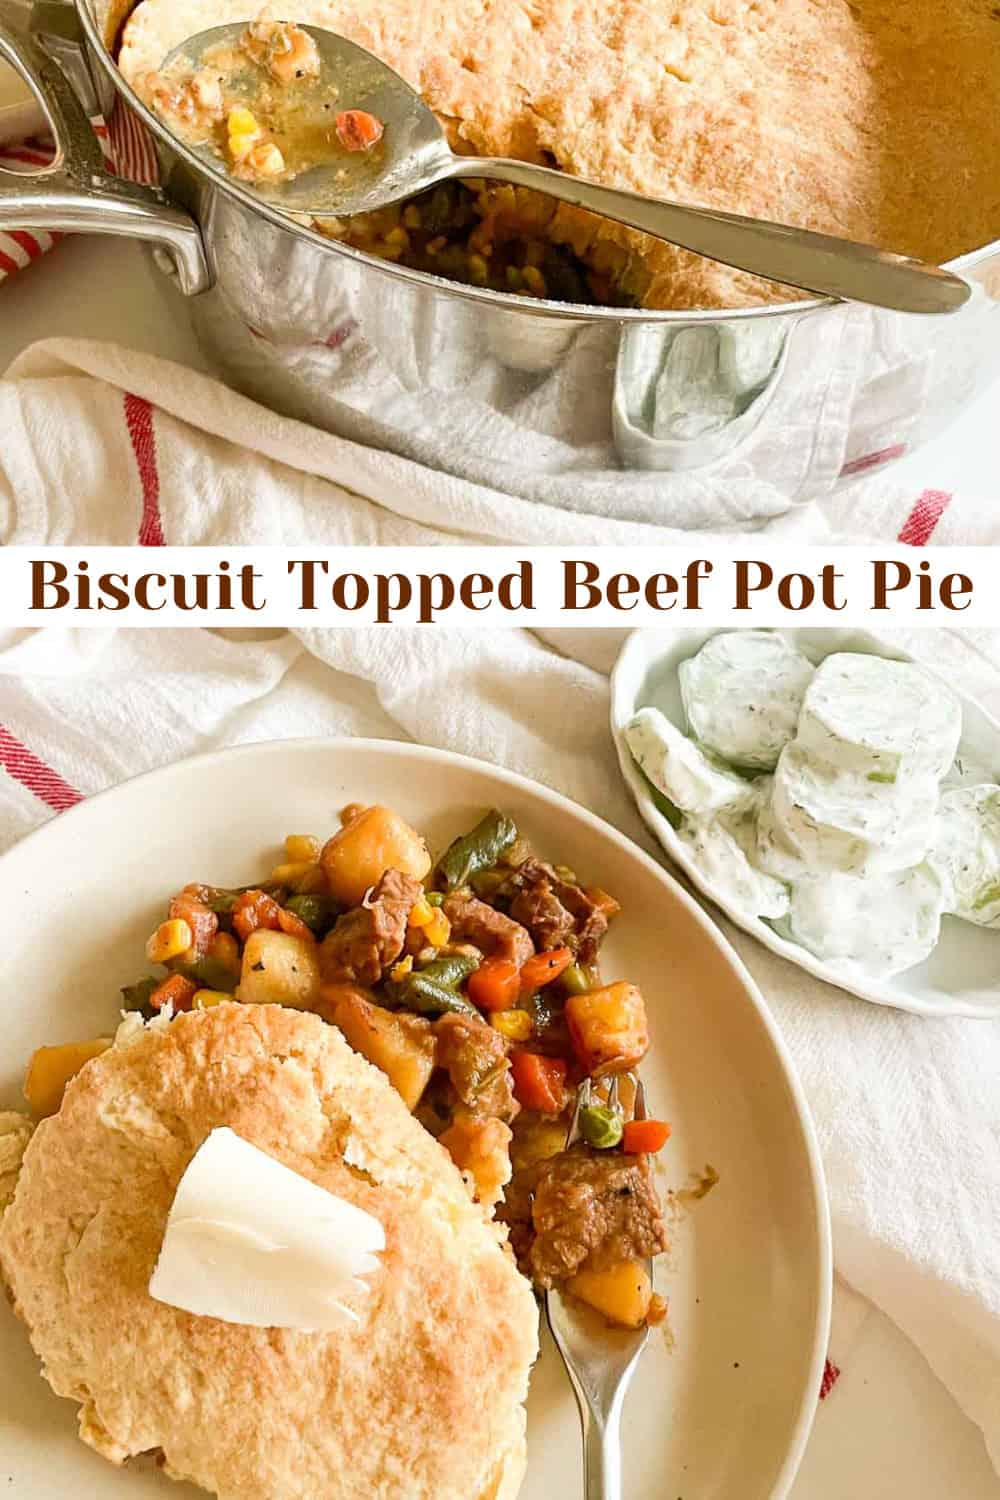 Savory beef pot pie featuring a flaky biscuit topping.